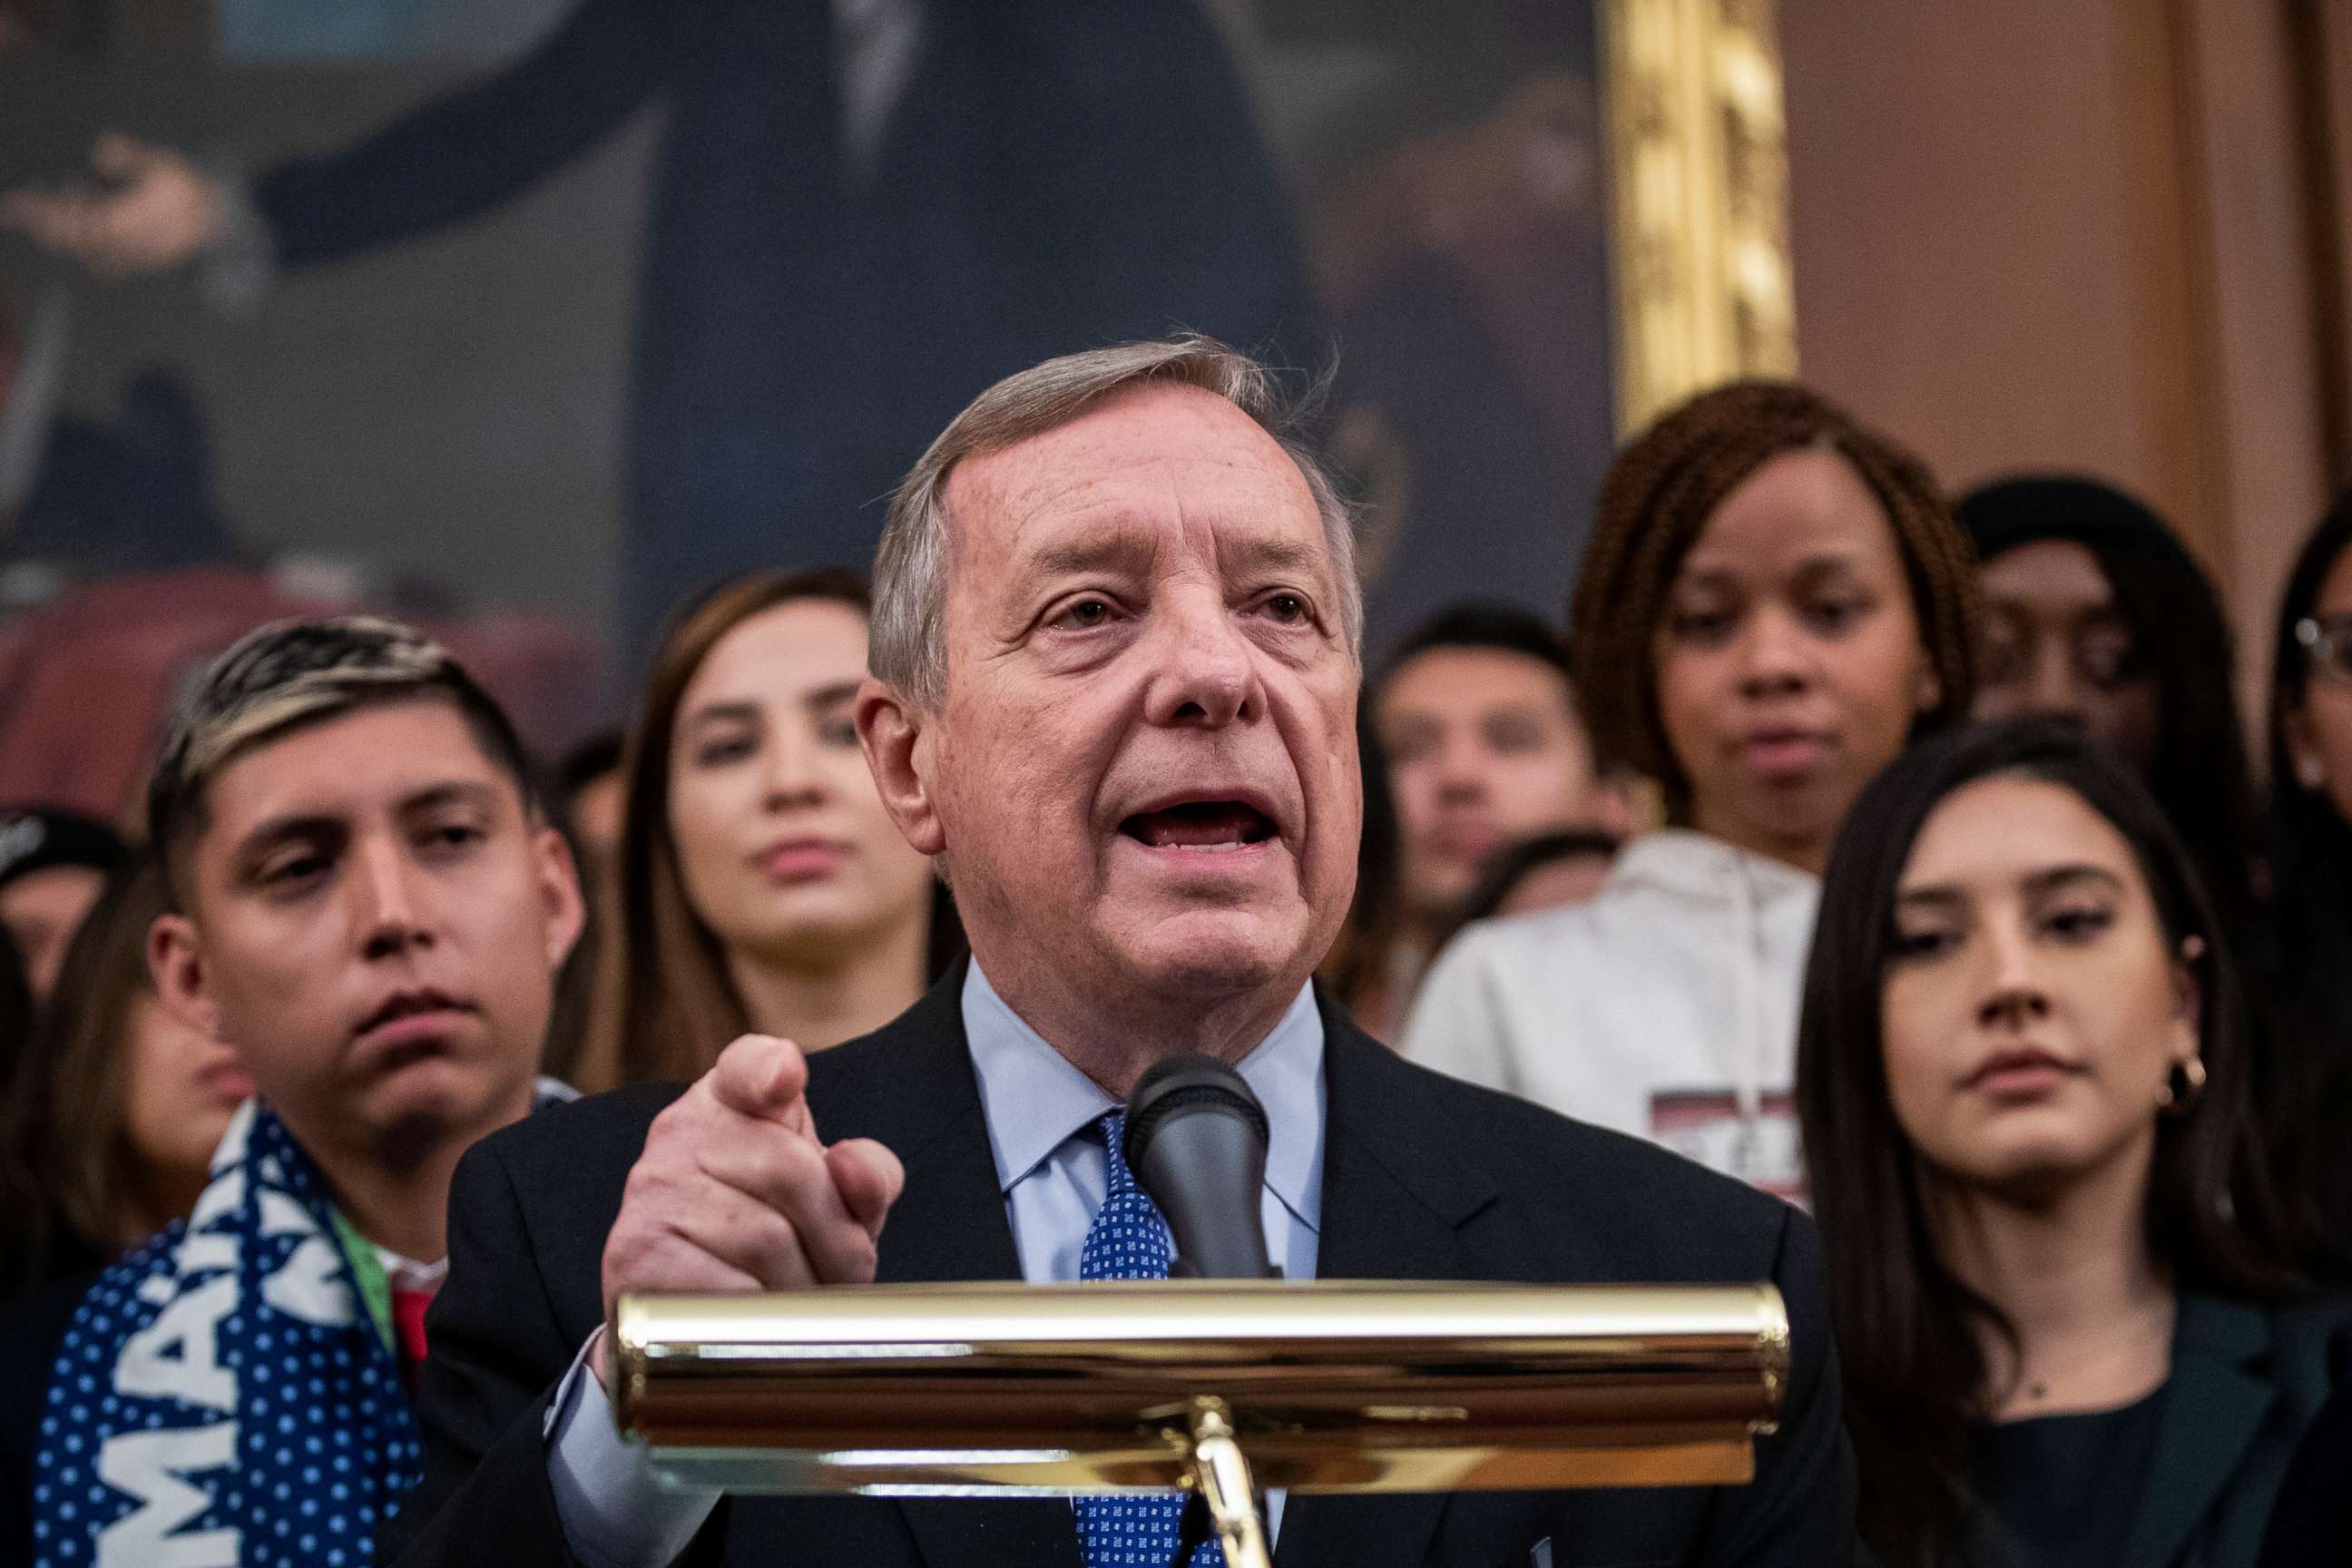 PHOTO: Sen. Dick Durbin speaks at a press conference at the U.S. Capitol on Nov. 12, 2019, in Washington.